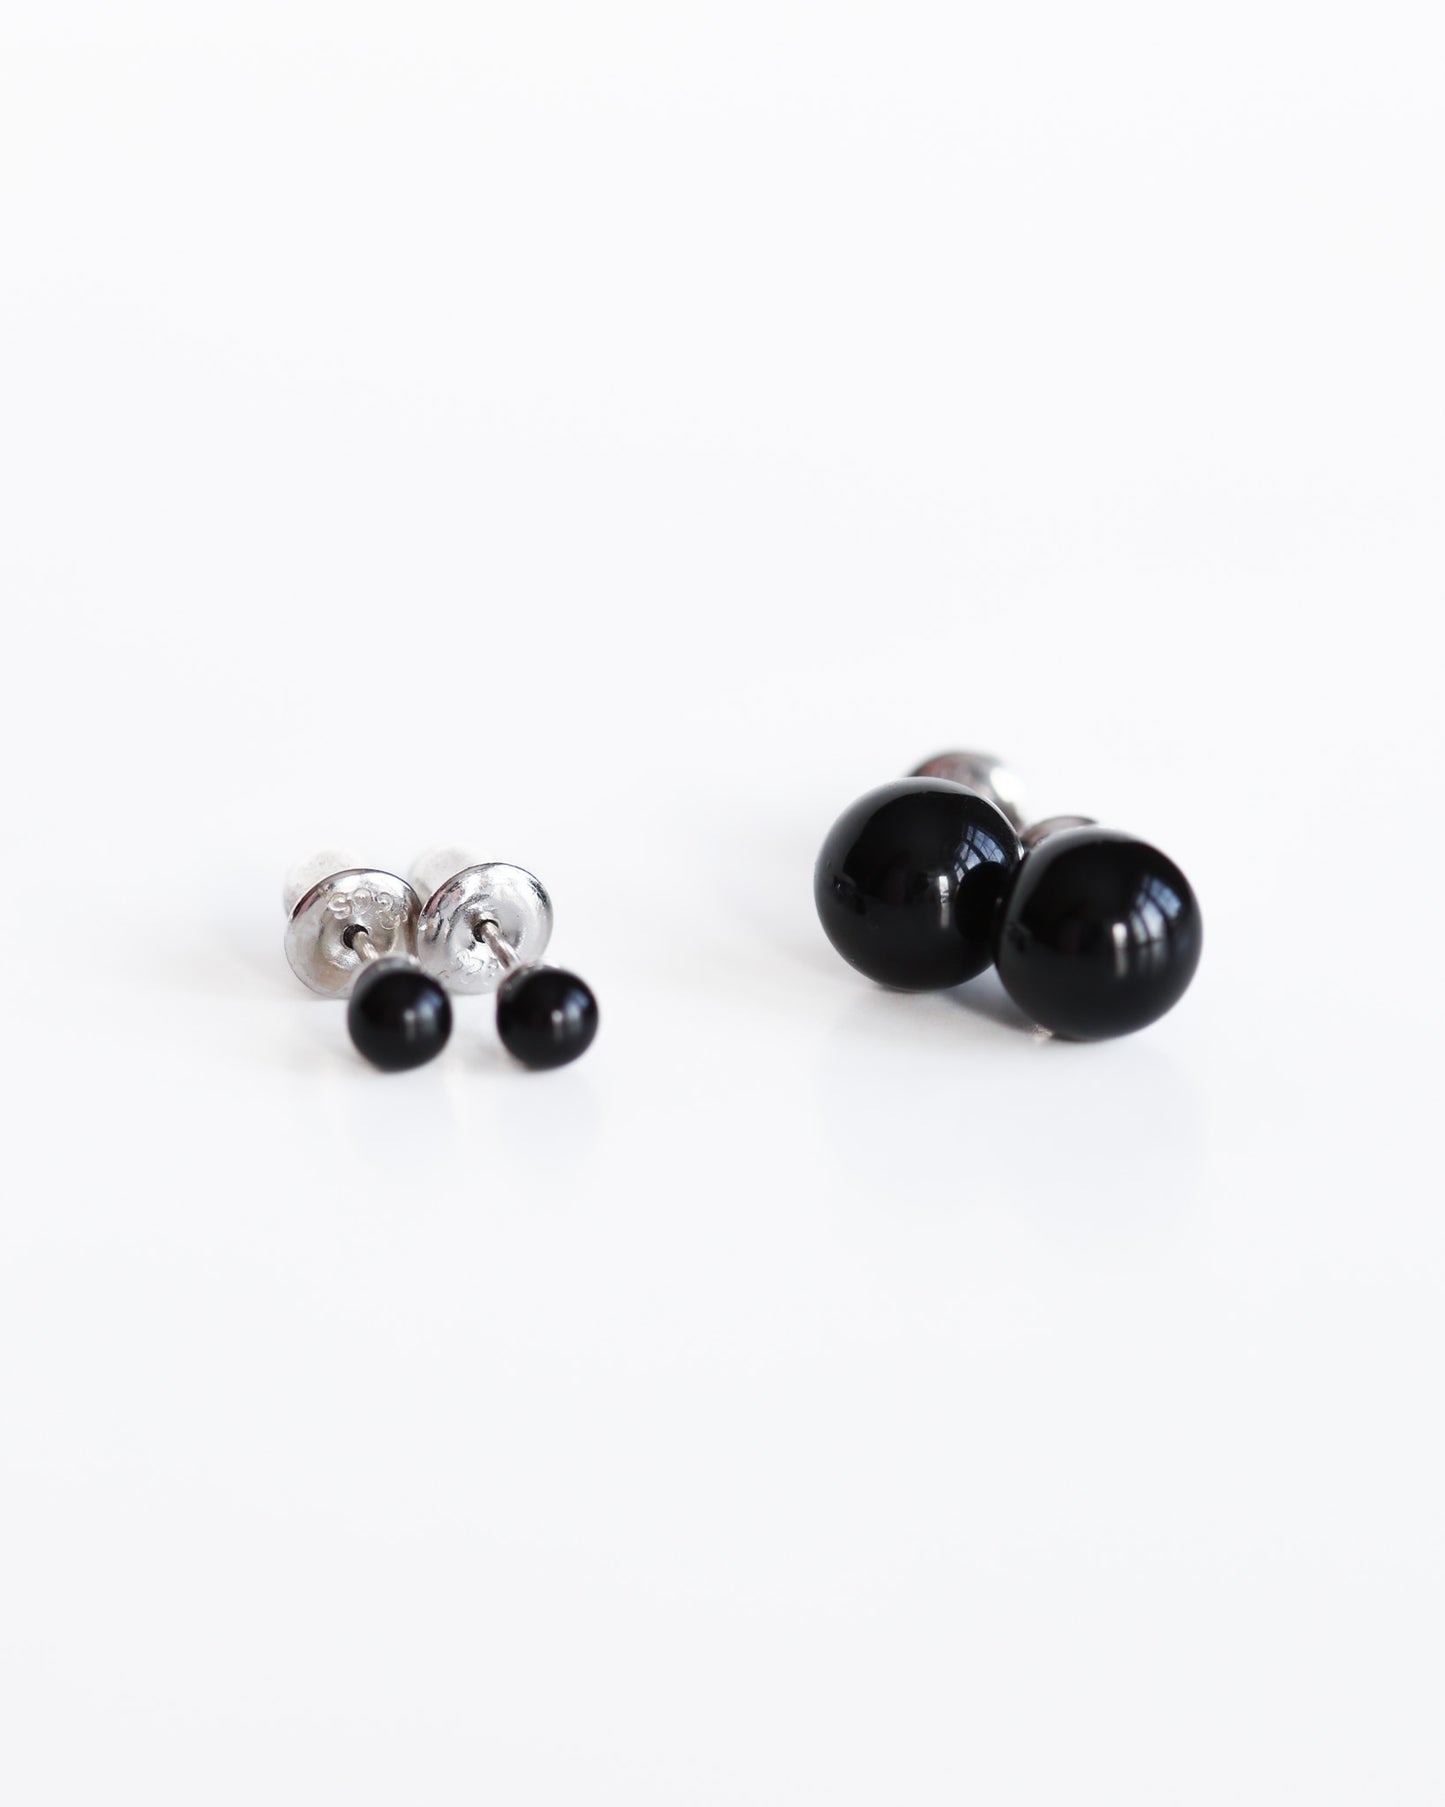 Black Agate Stud Earrings with Sterling Silver Posts